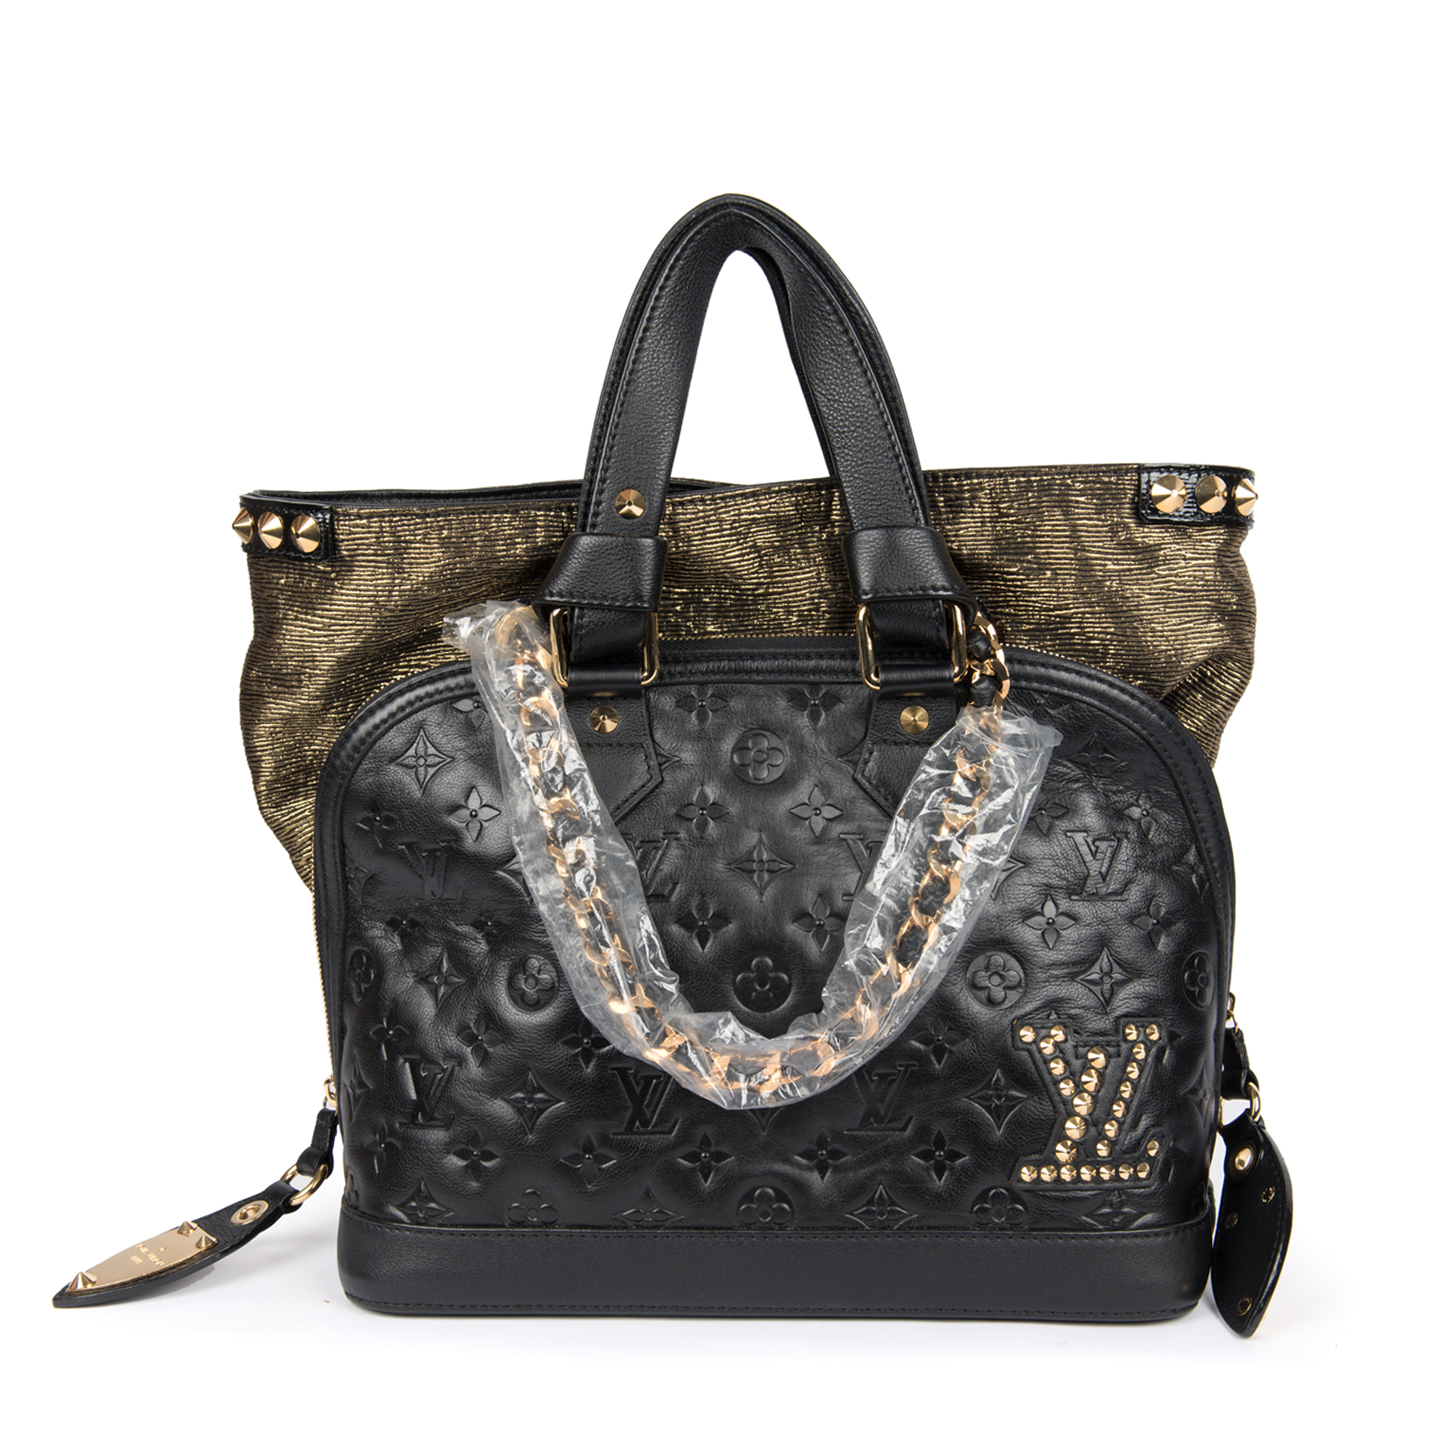 Louis Vuitton Bags Price List In Indian - Neverfull Bag